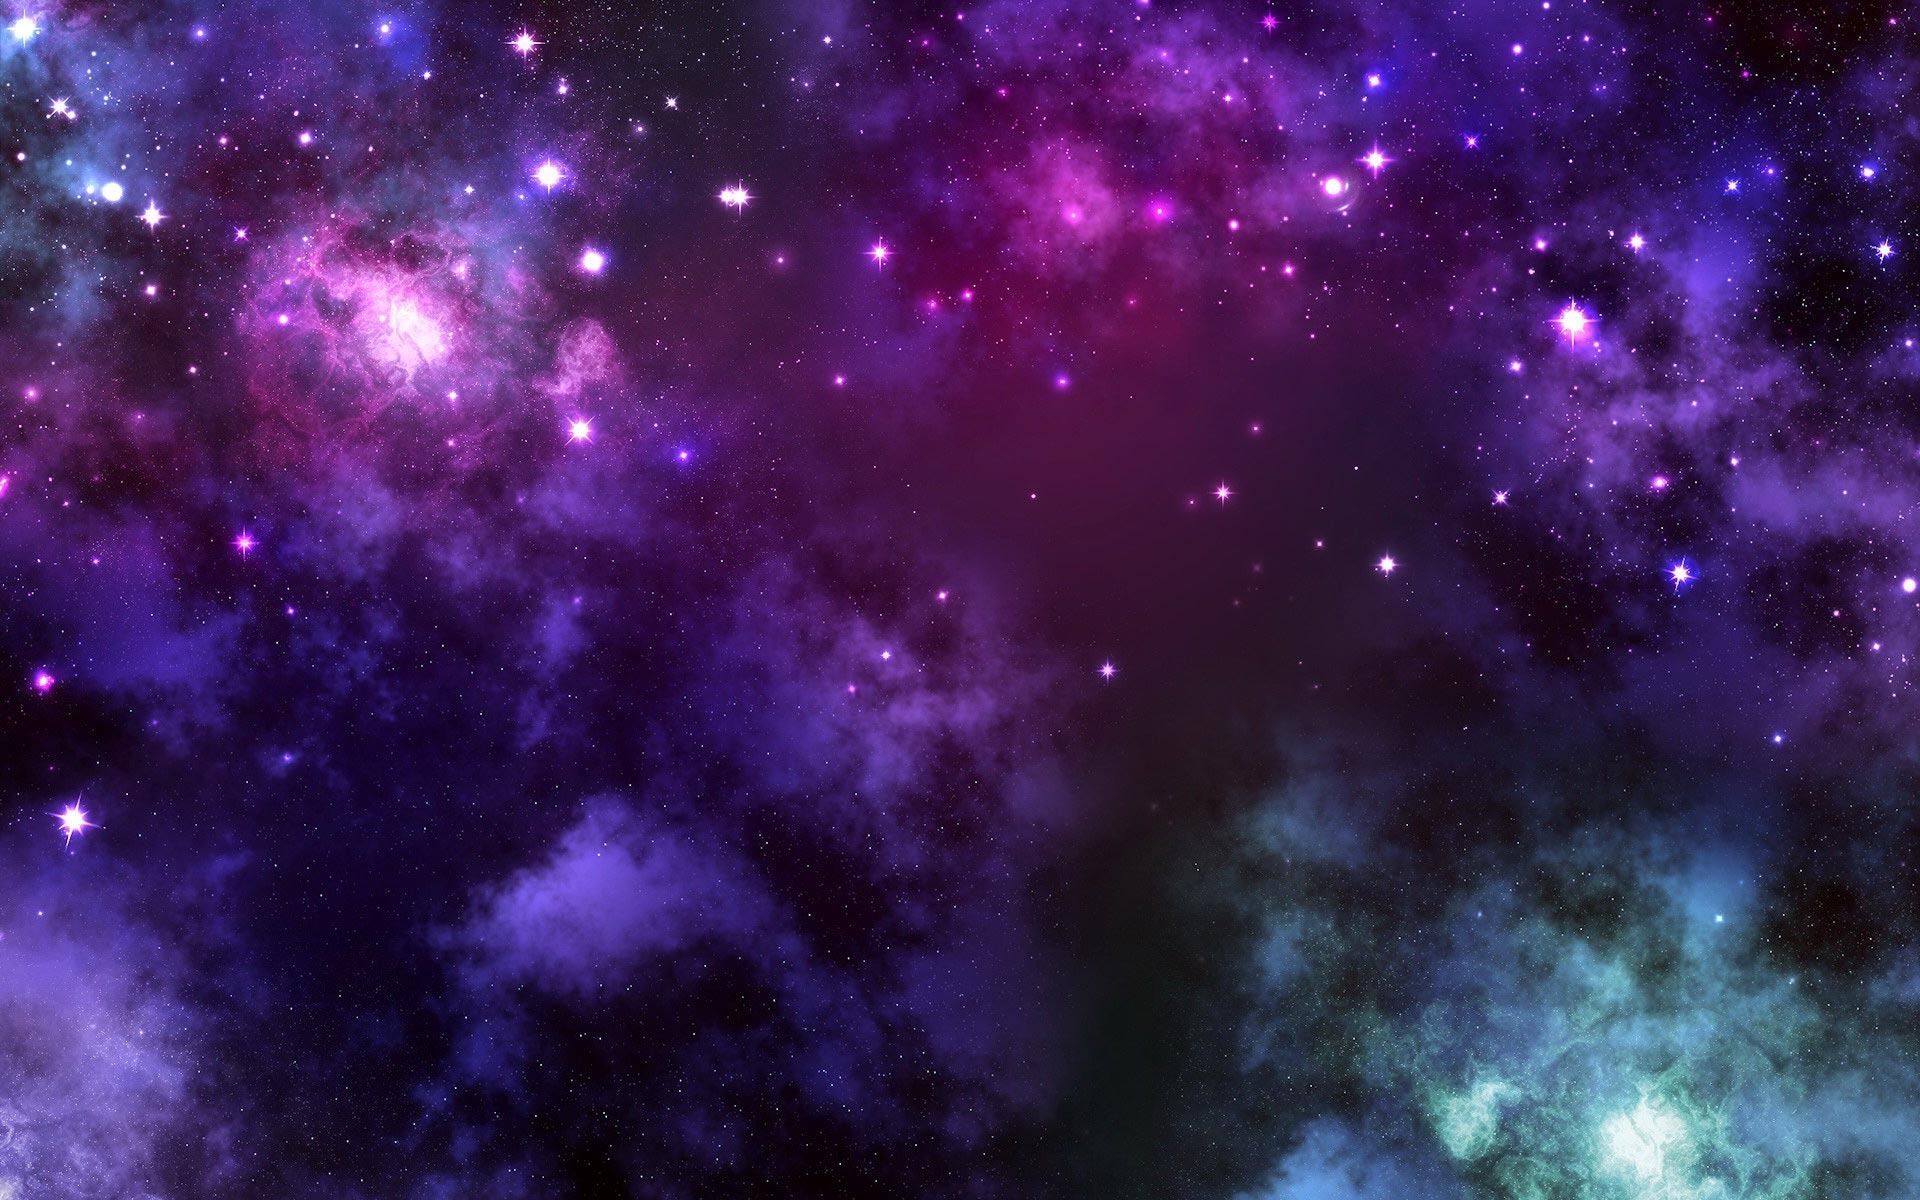 Amazing Solar System Backgrounds in Purple - Pics about space